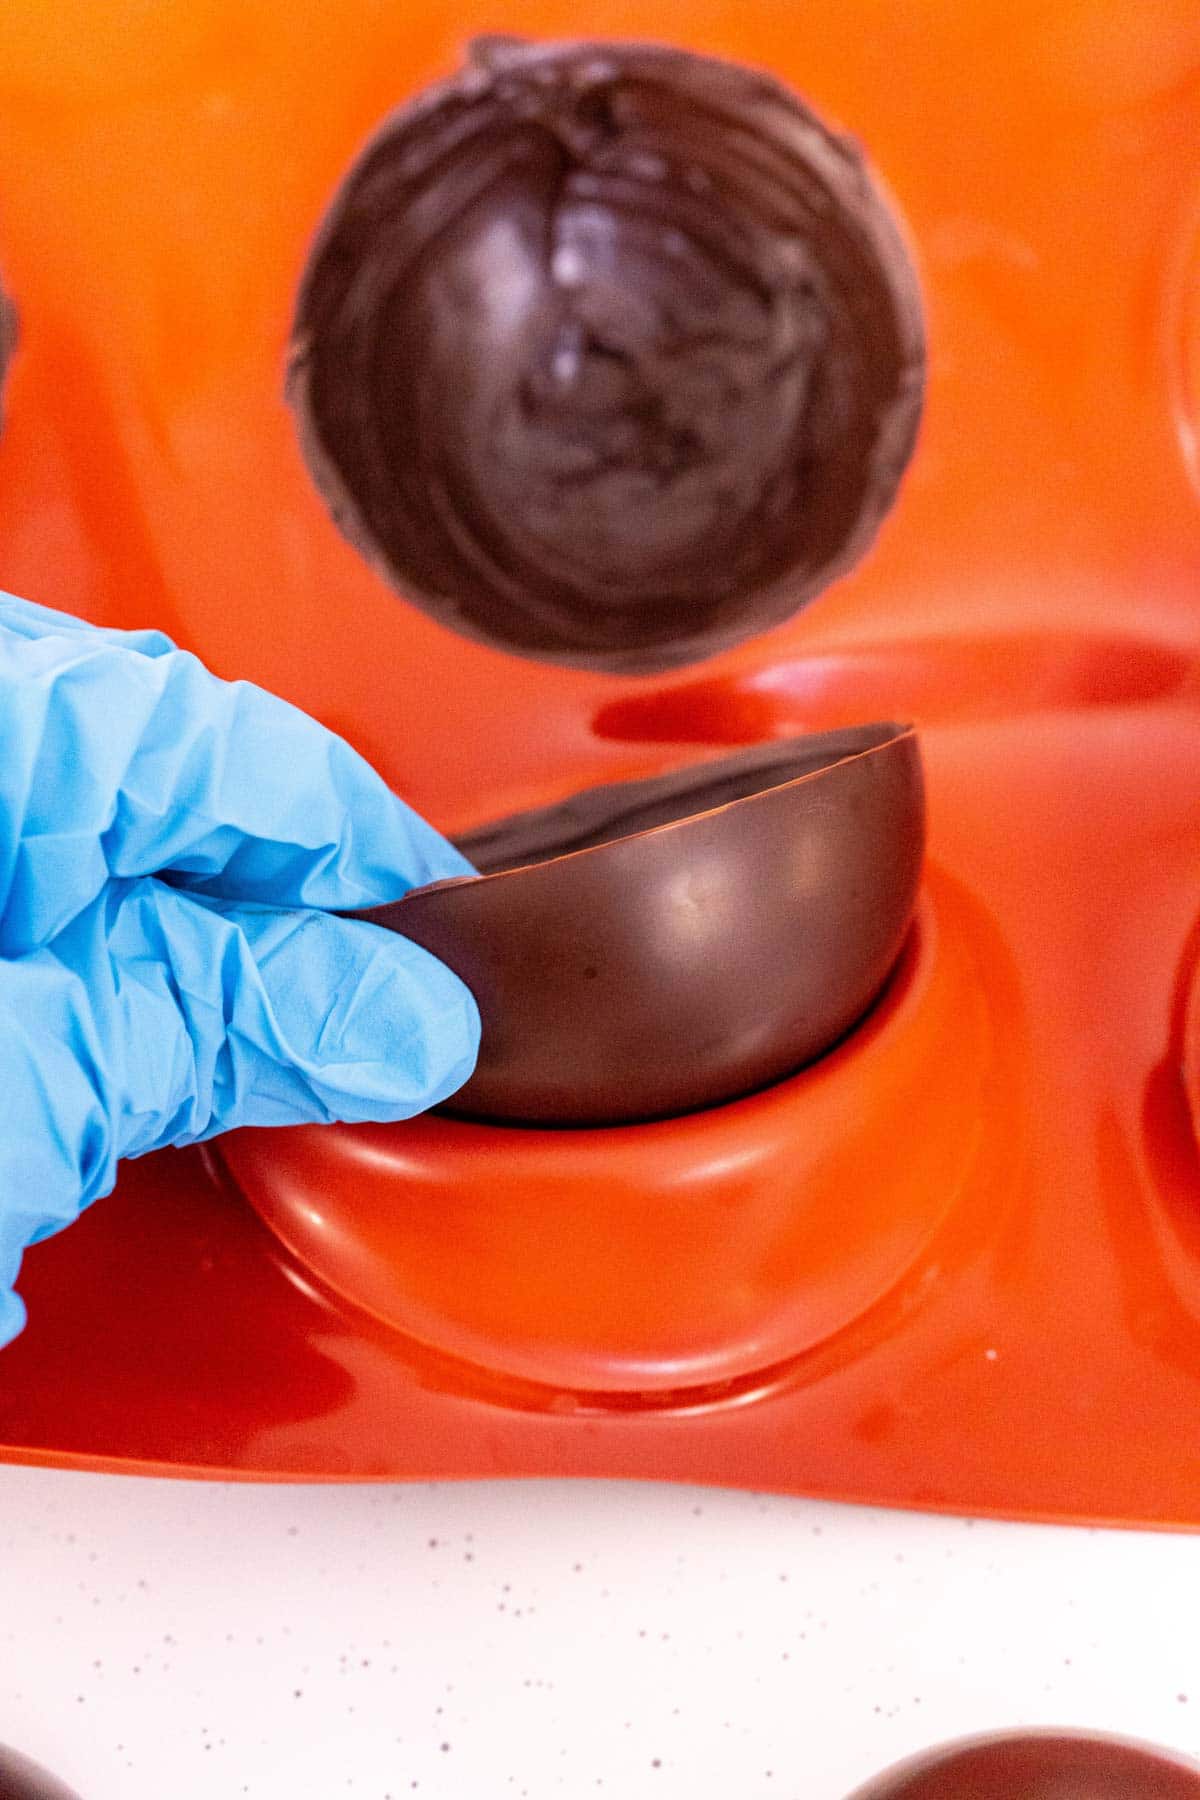 Woman's hand removing a hot chocolate bomb from a mold